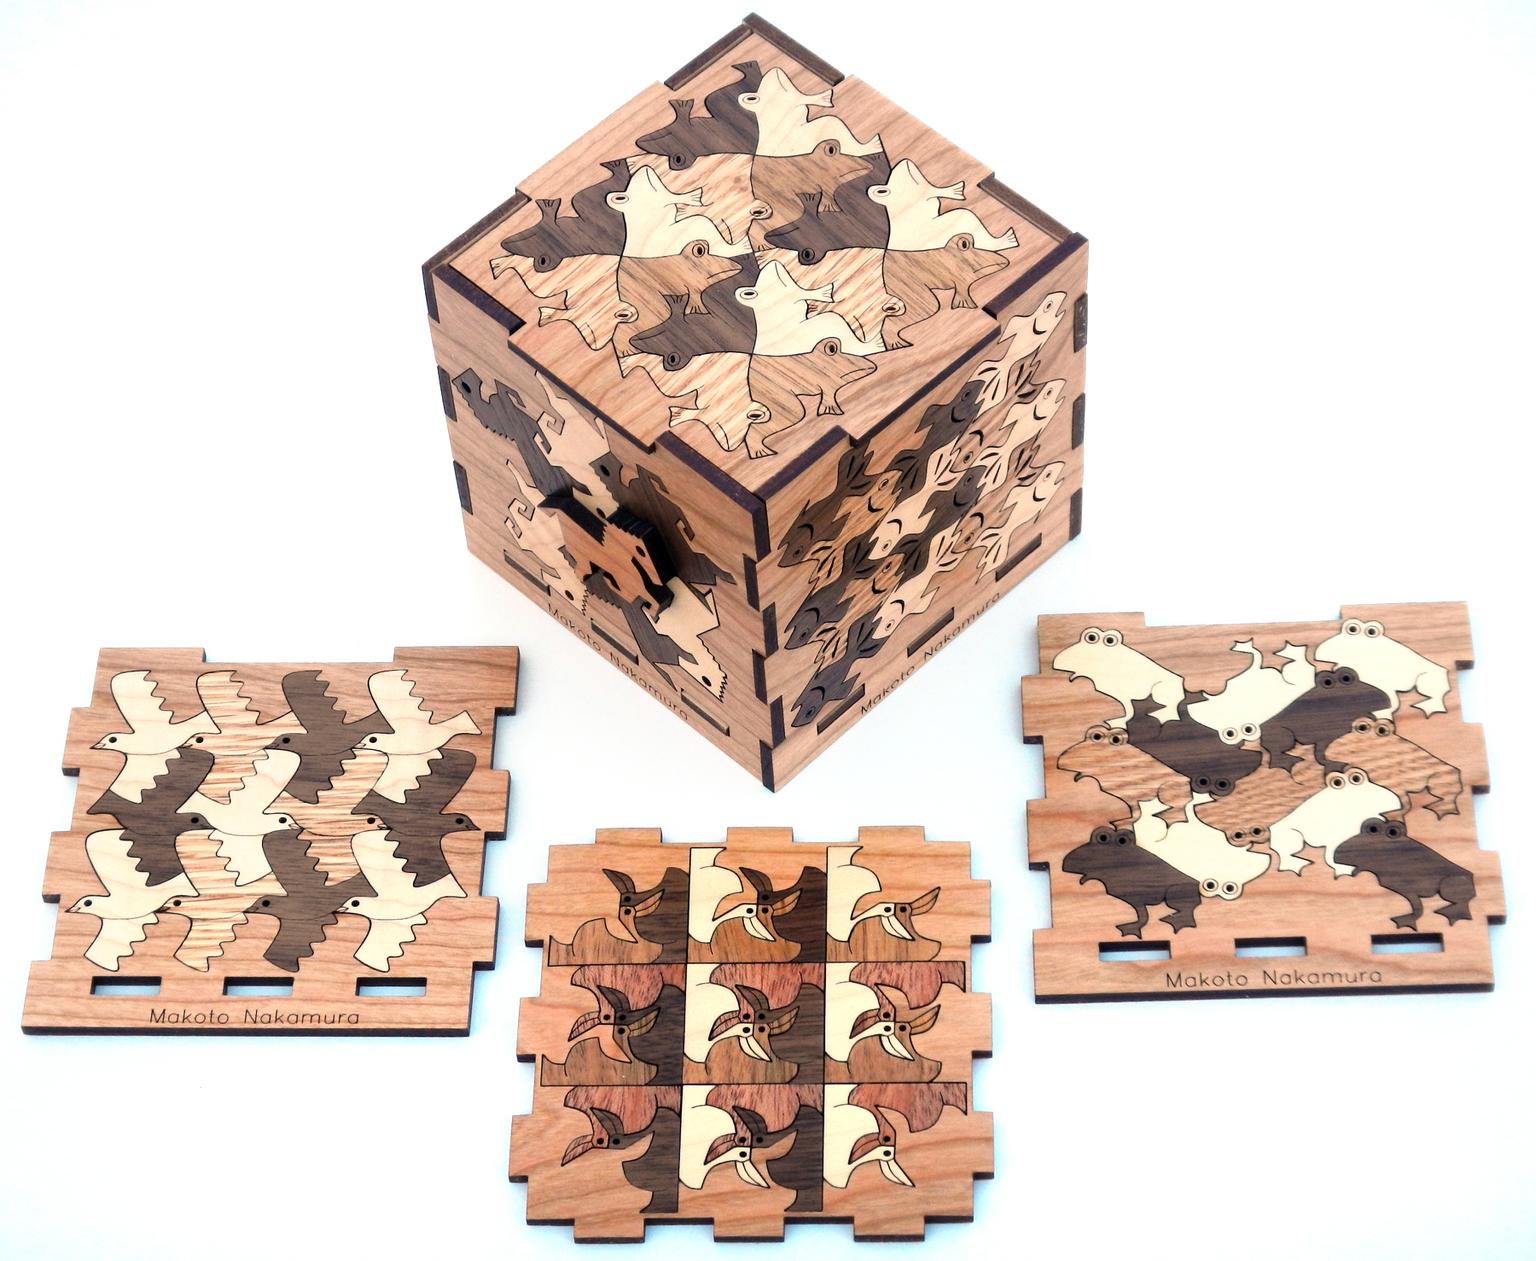 Image for entry 'Inlaid Wooden Box of Makoto Nakamura's Tessellations'